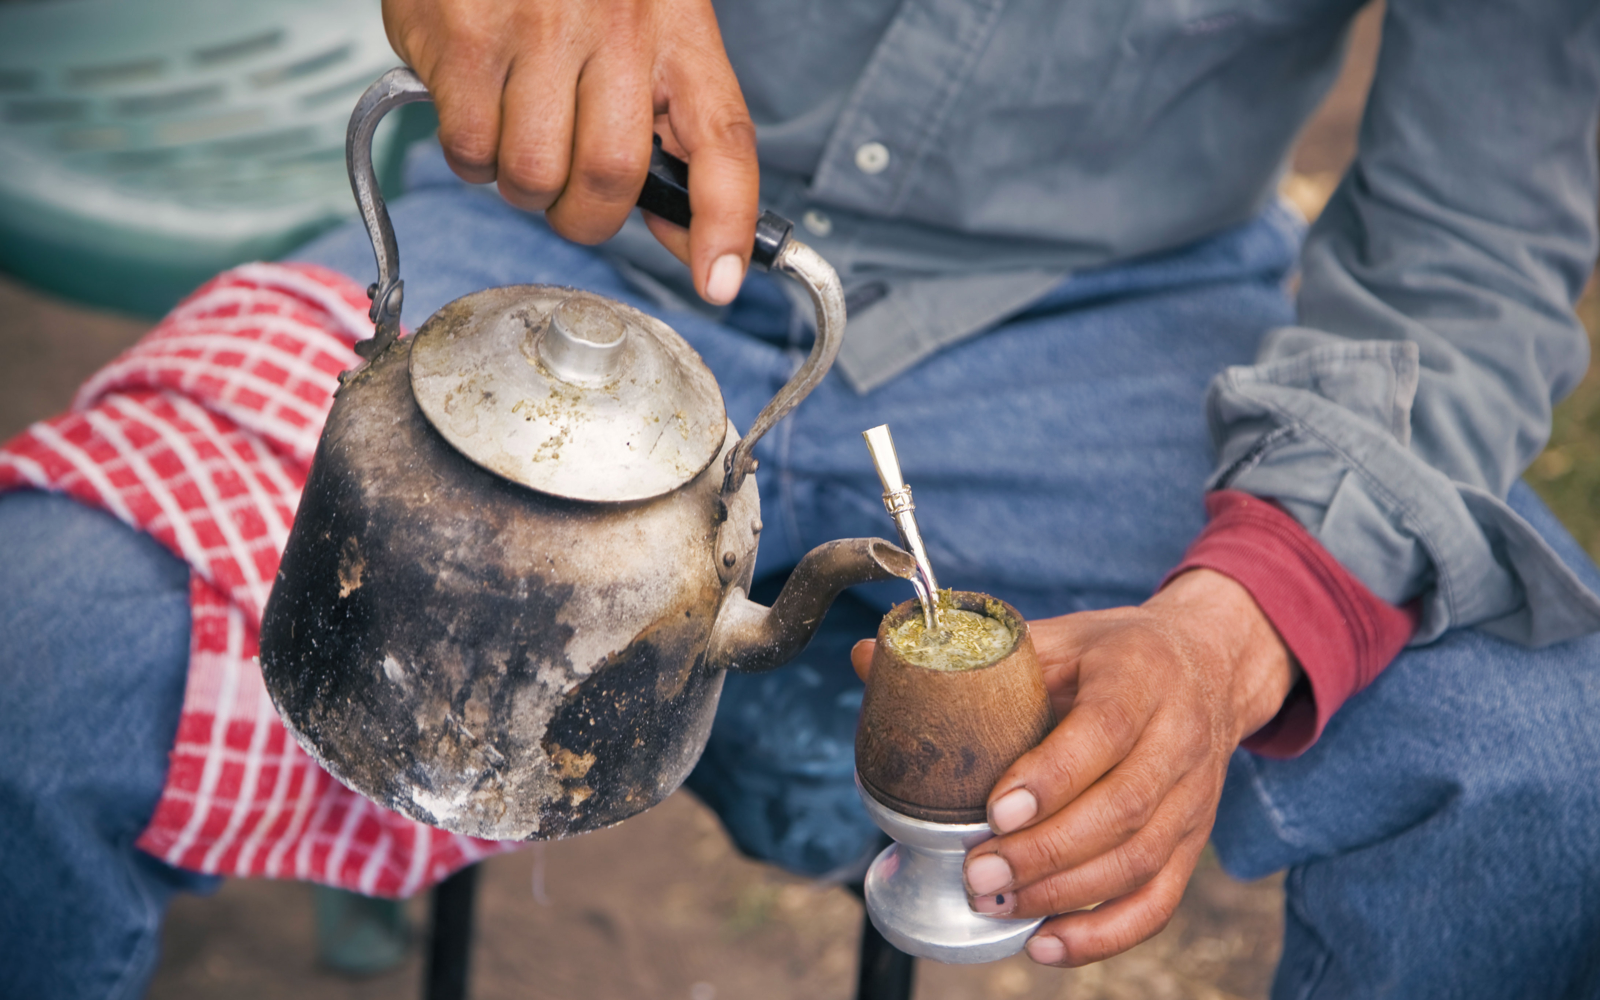 Share a maté with the locals